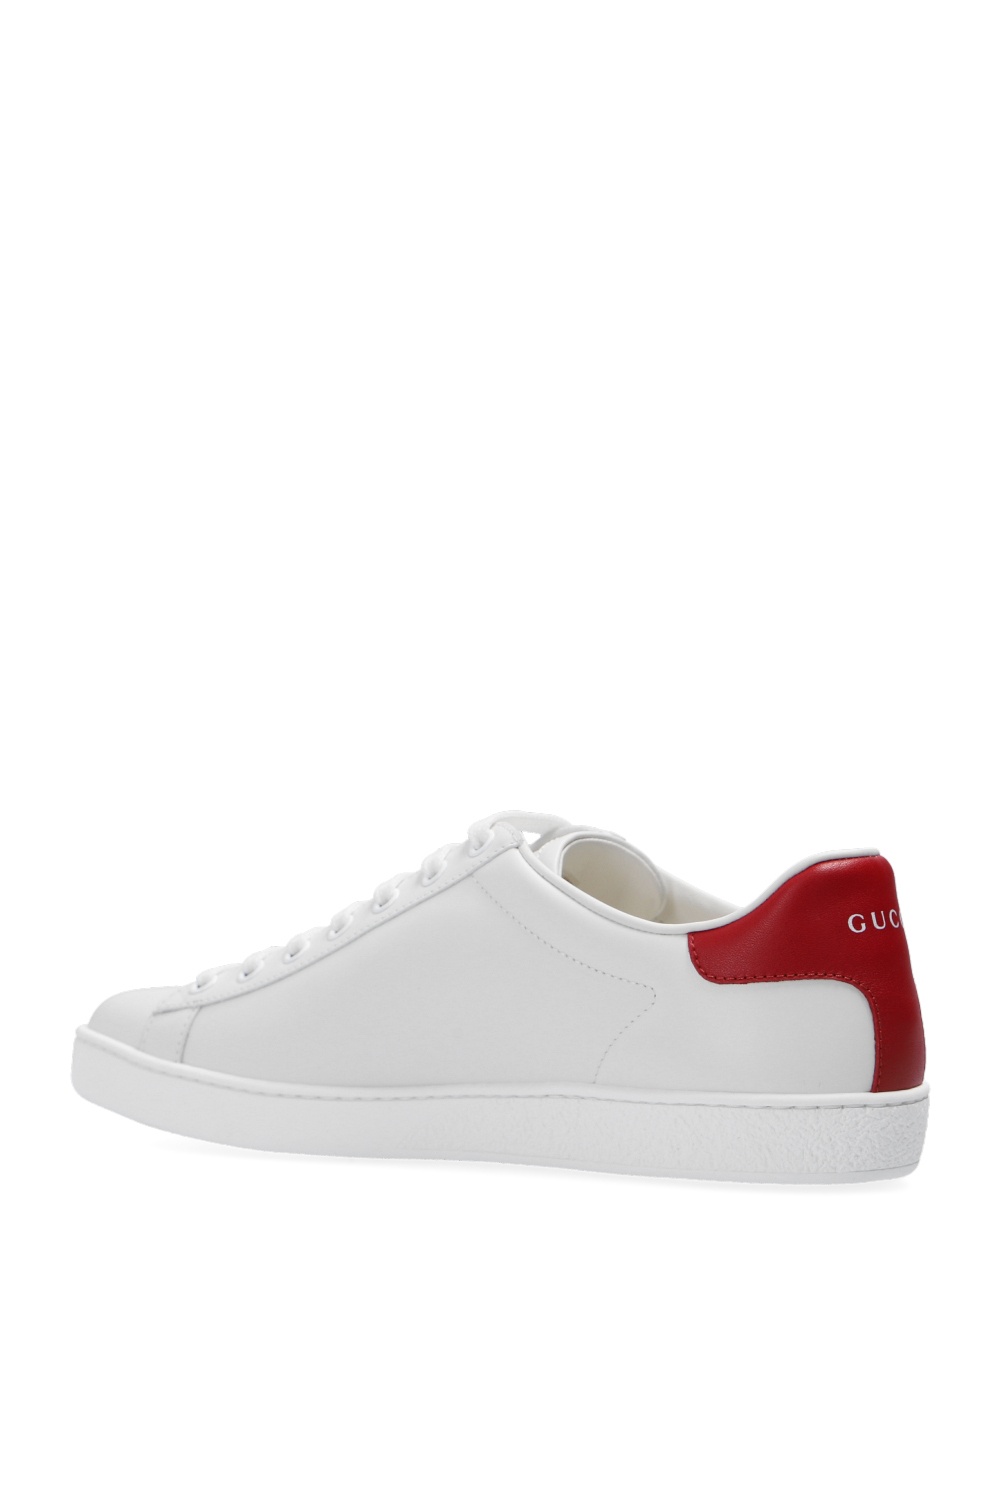 Gucci 'Ace' leather sneakers | Women's Shoes | Vitkac